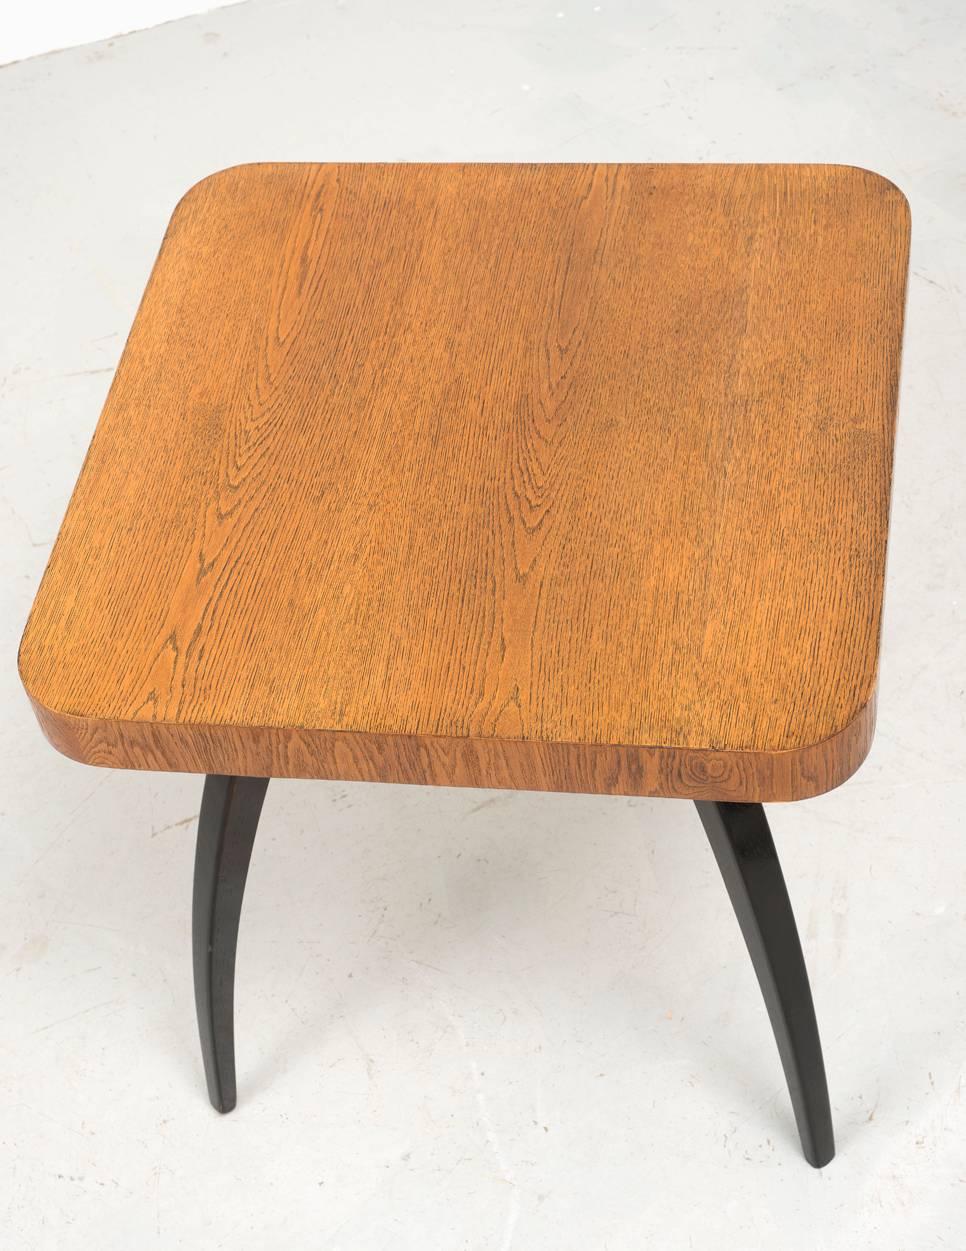 Striking side table model H259 by Jindrich Halabala. Designed in Prague in 1930, manufactured by UP Zavody. Oak ebonized legs and oak varnished top with beautiful wood grain details.